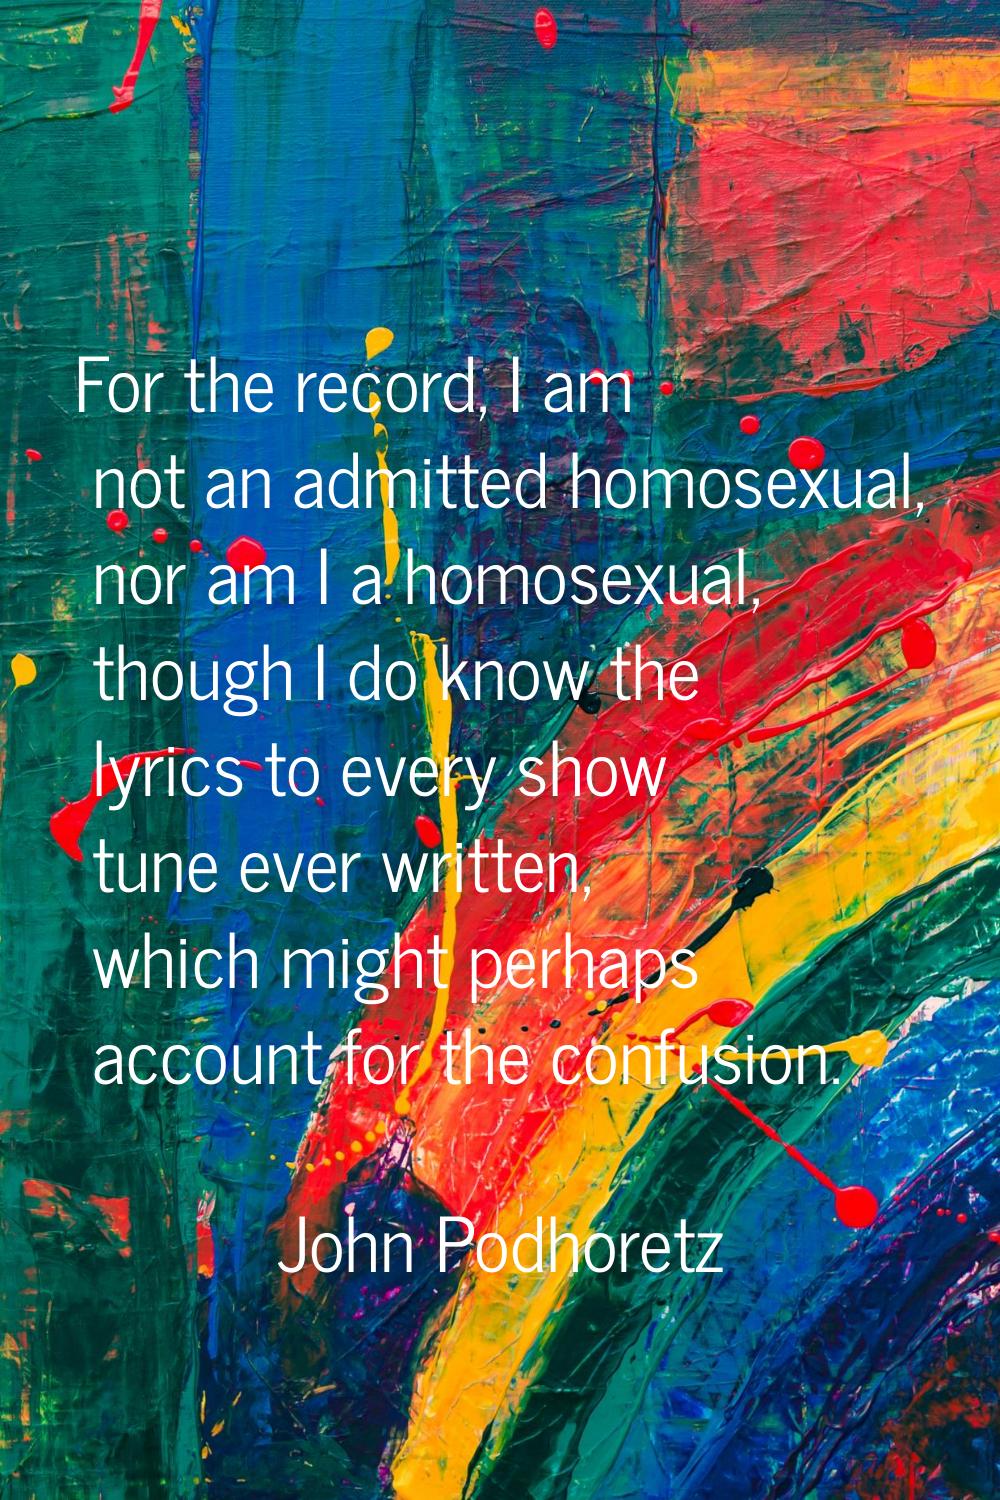 For the record, I am not an admitted homosexual, nor am I a homosexual, though I do know the lyrics